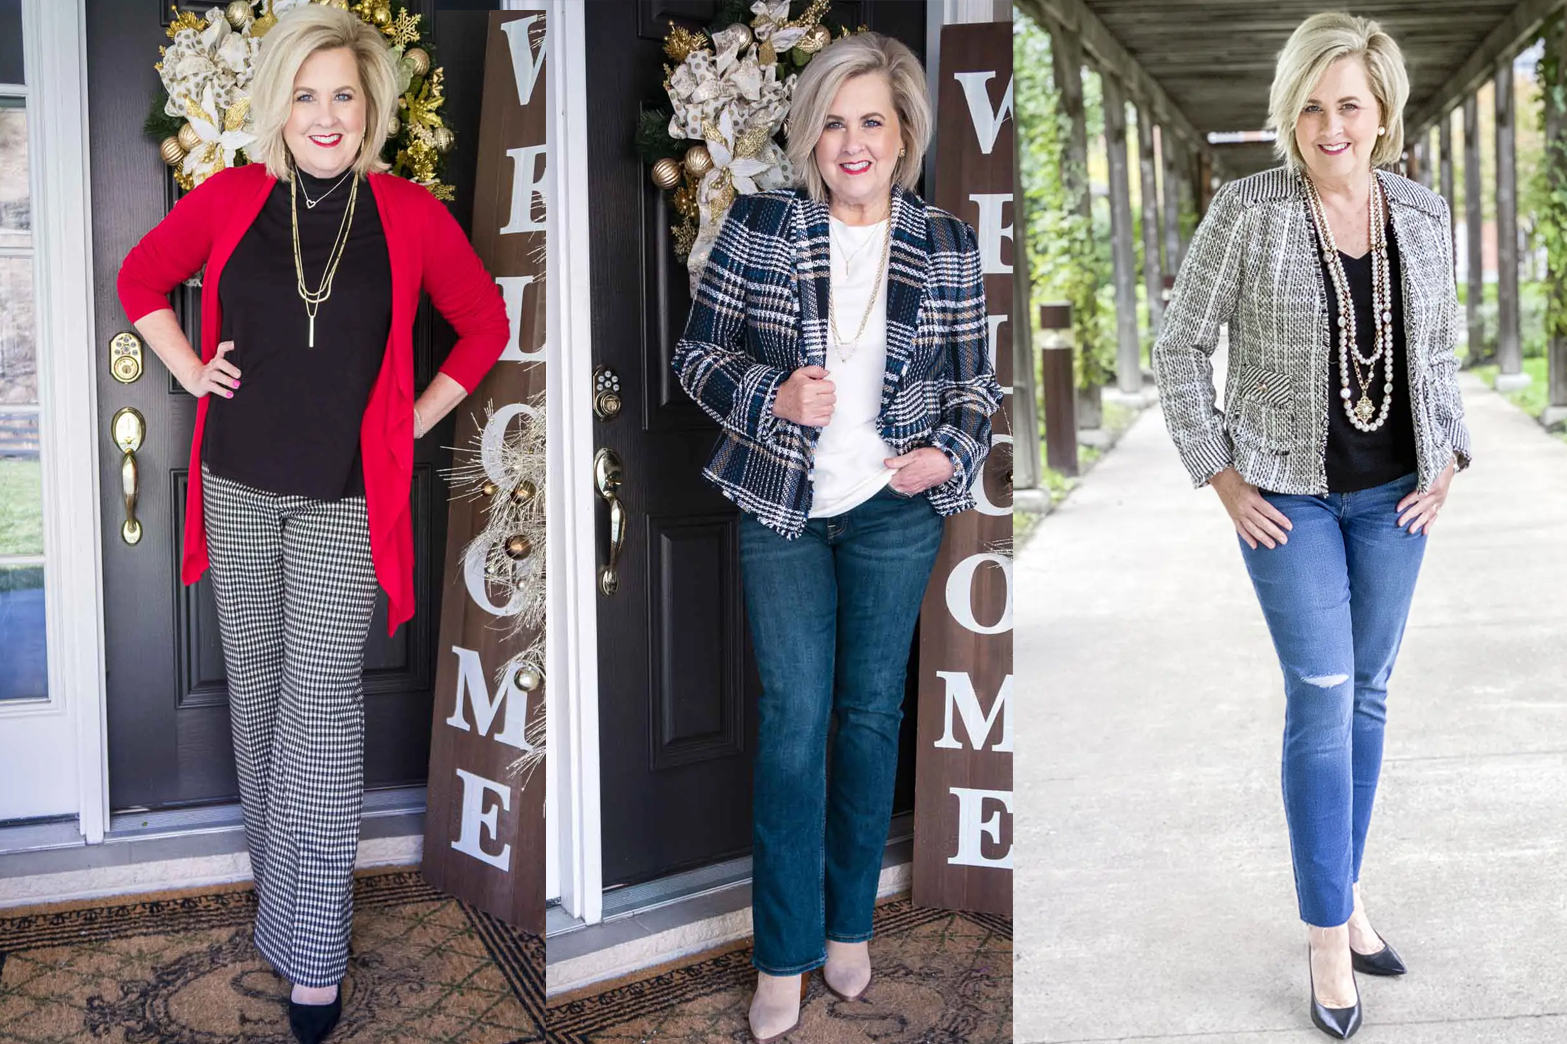 ANKLE BOOTS AND JEANS - 50 IS NOT OLD - A Fashion And Beauty Blog